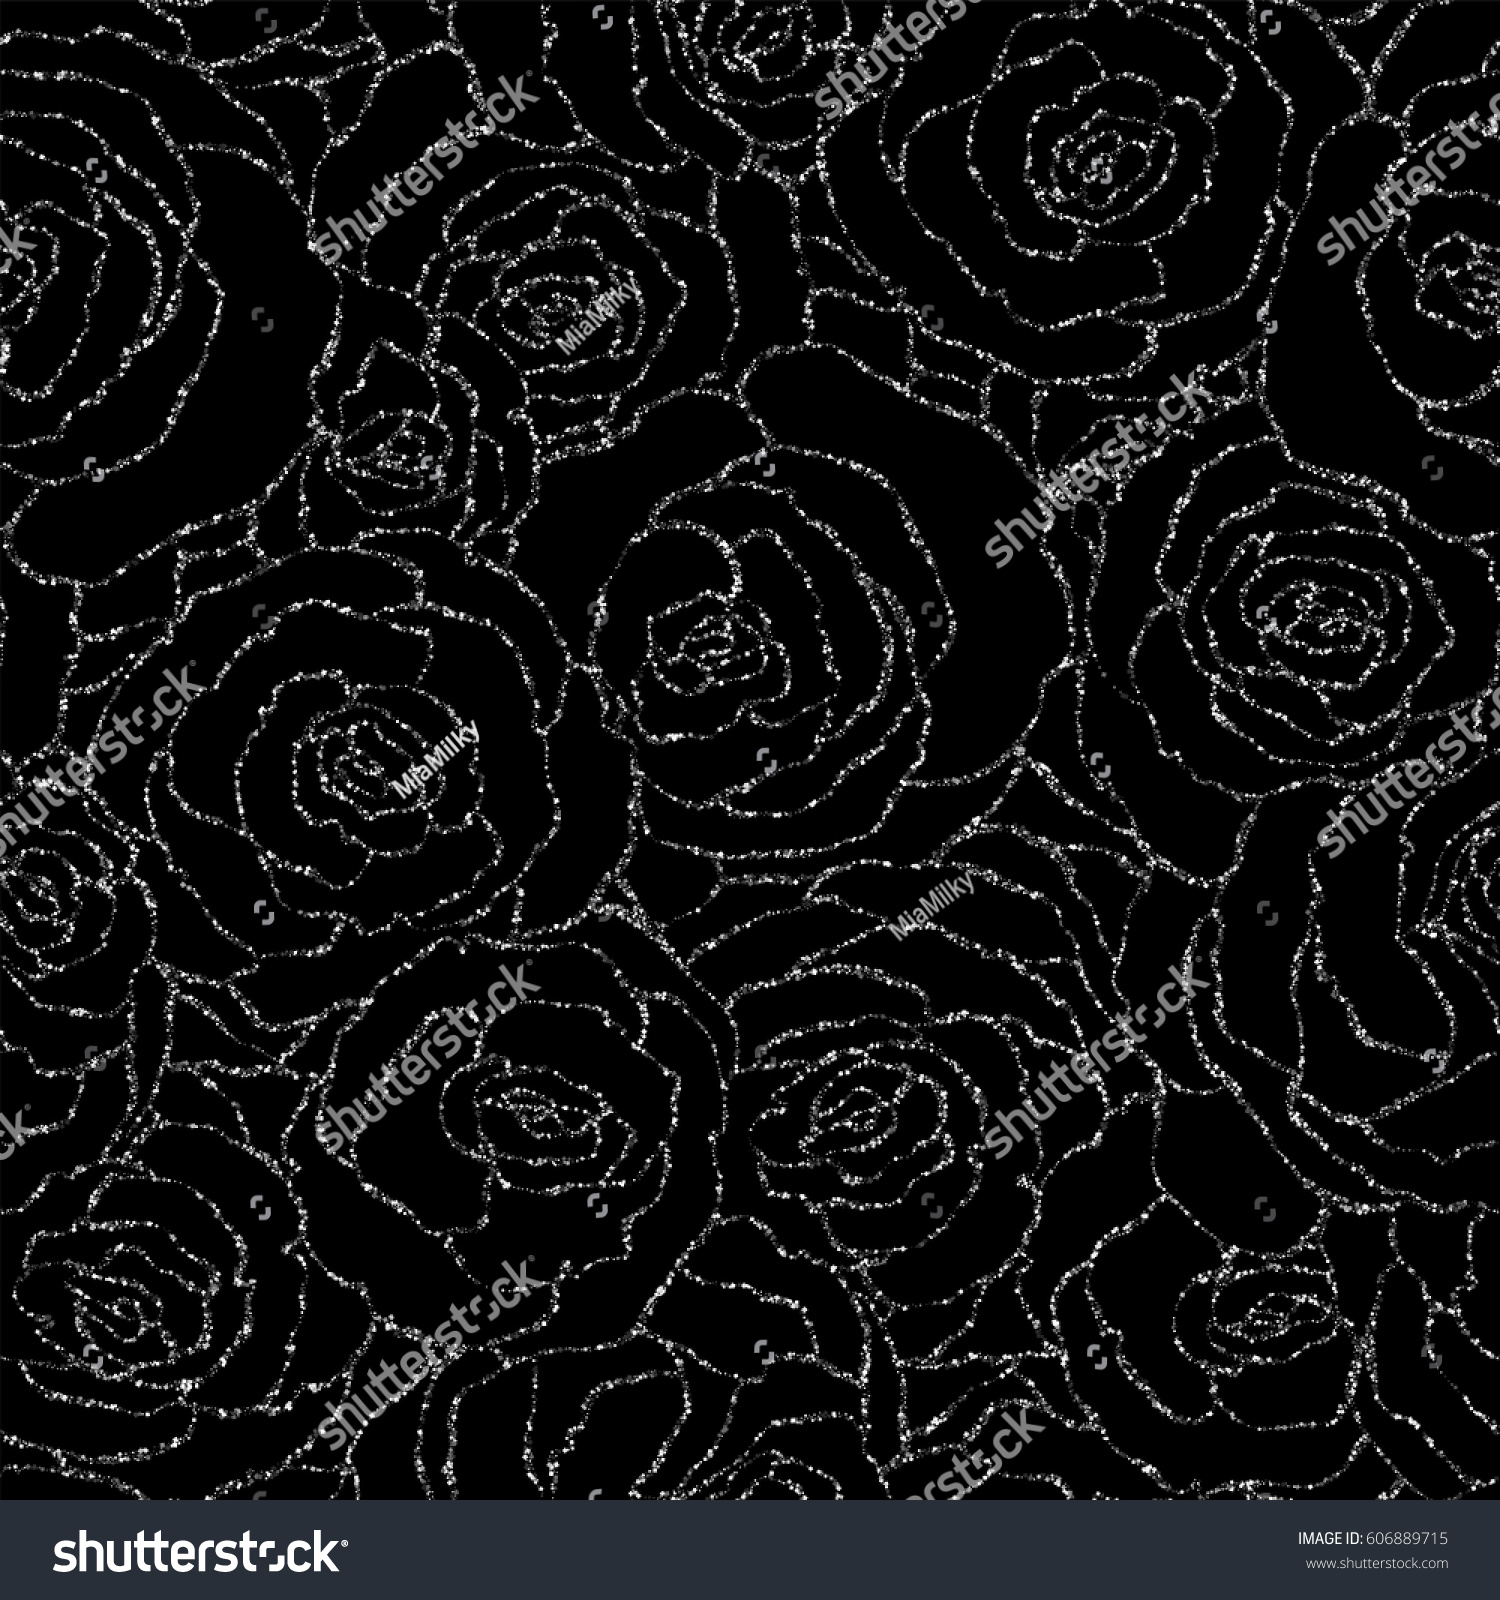 SVG of Seamless pattern with vector silver glitter roses. Vector illustration of a silhouette of a flower, consisting of sequins or glitter. Glittering decoration background, glamour shiny texture svg